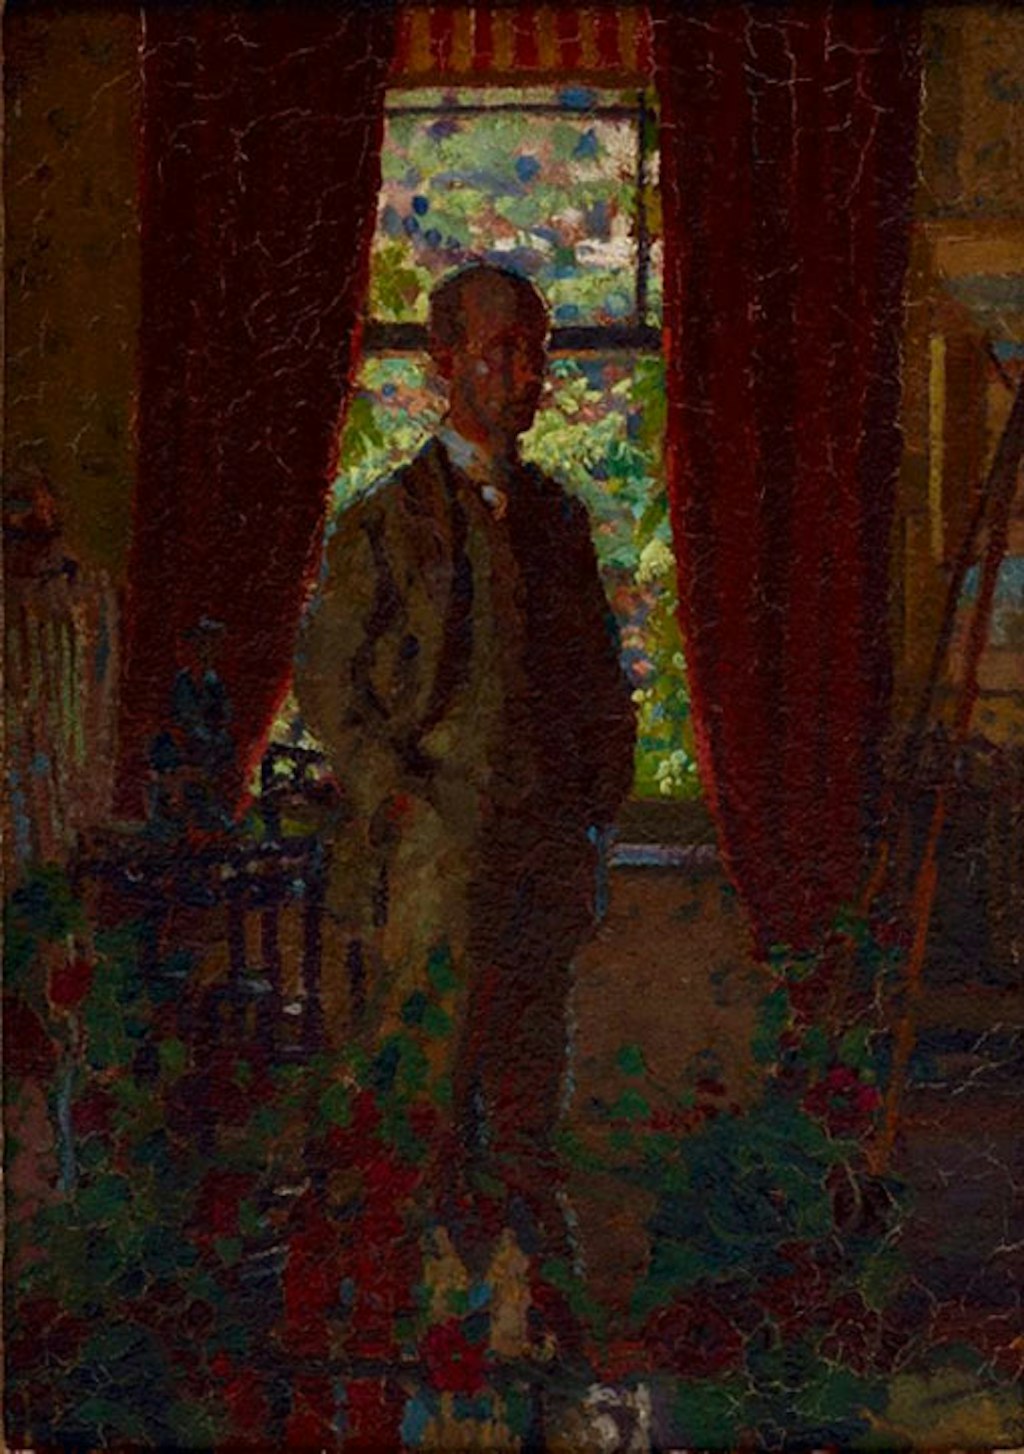 A person in a three-piece suit and tie stands in front of a window in a domestic setting. The light outside is bright and the room dark.